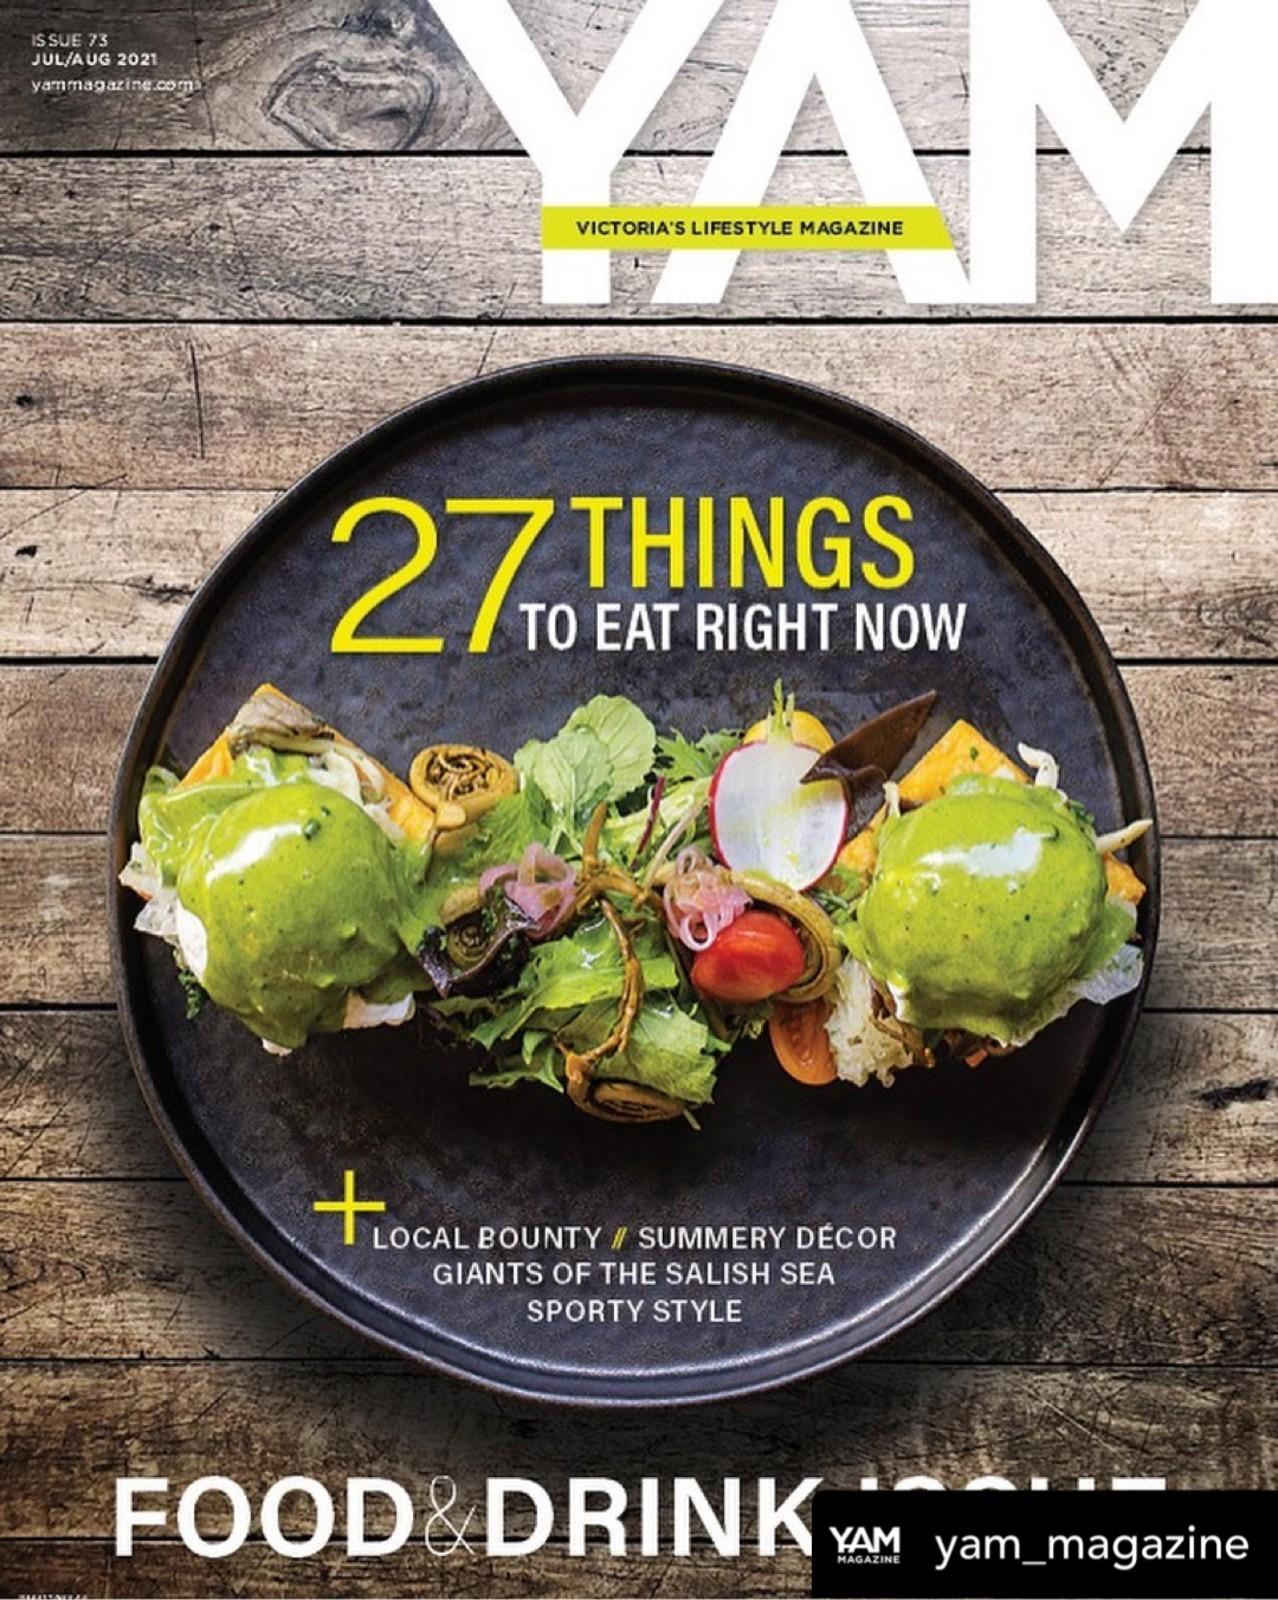 Image of the Yam magazine cover with a House of Boateng dish on the front.